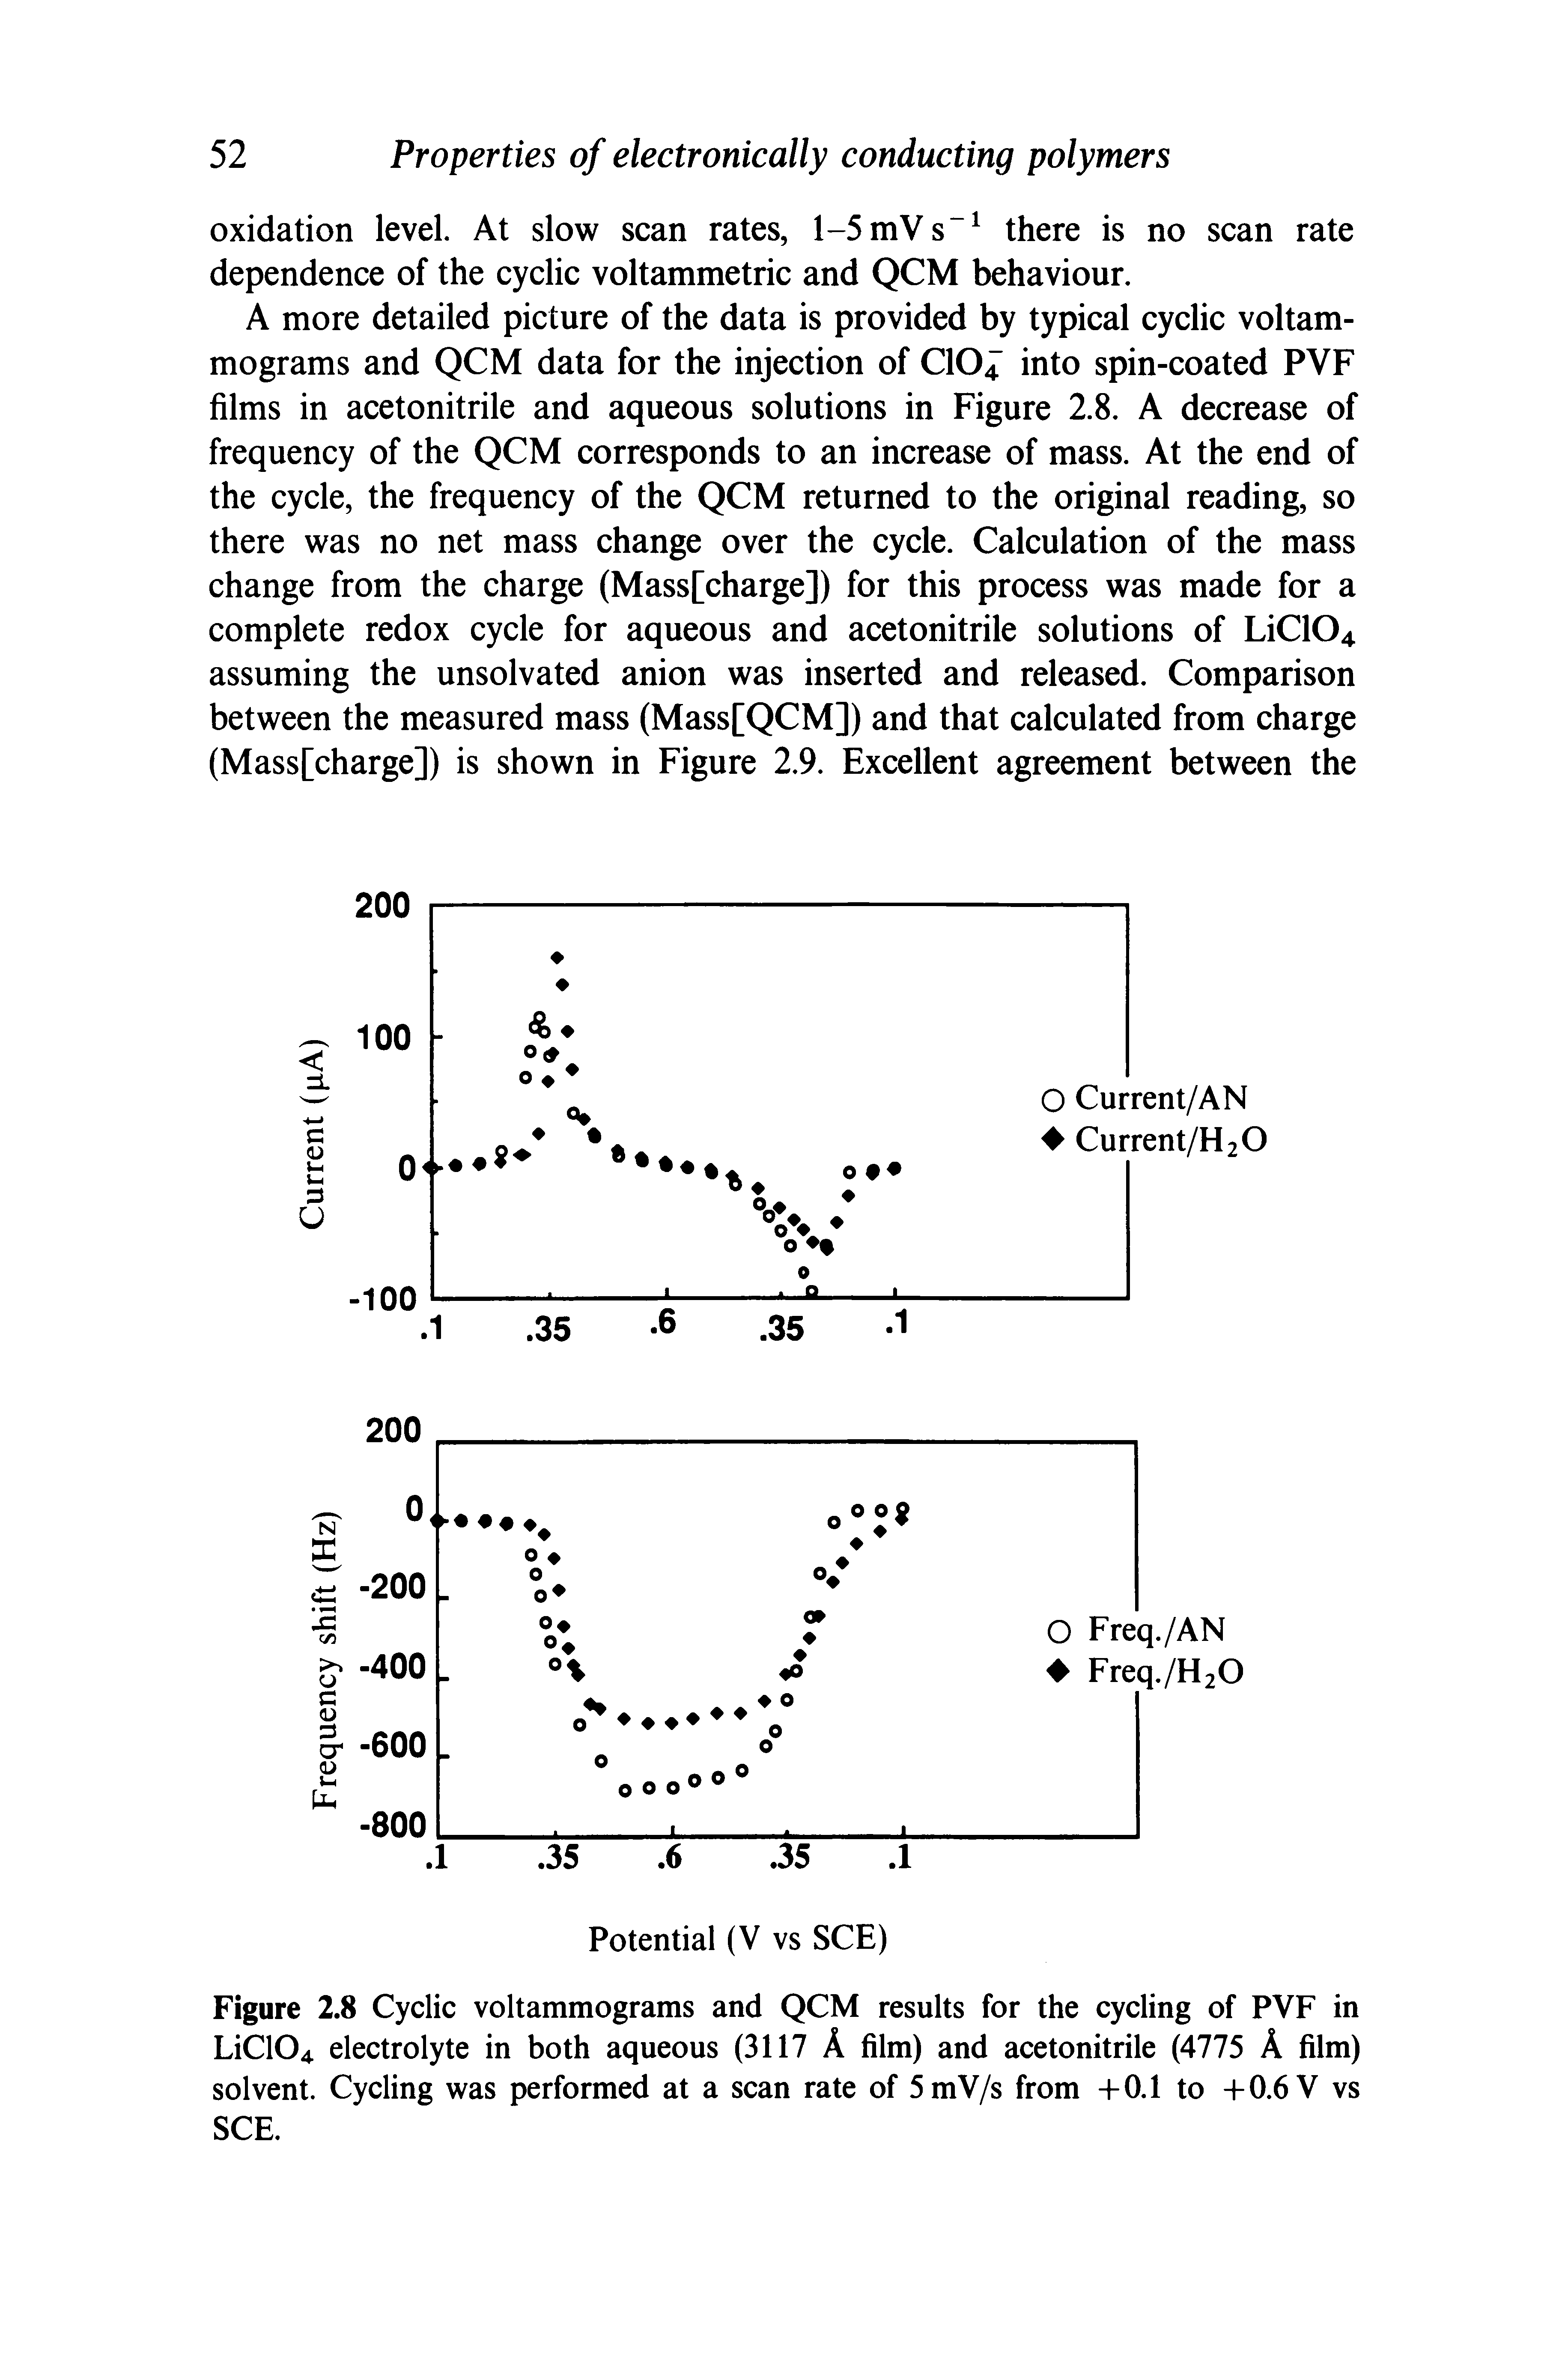 Figure 2.8 Cyclic voltammograms and QCM results for the cycling of PVF in LiC104 electrolyte in both aqueous (3117 A film) and acetonitrile (4775 A film) solvent. Cycling was performed at a scan rate of 5mV/s from +0.1 to +0.6 V vs SCE.